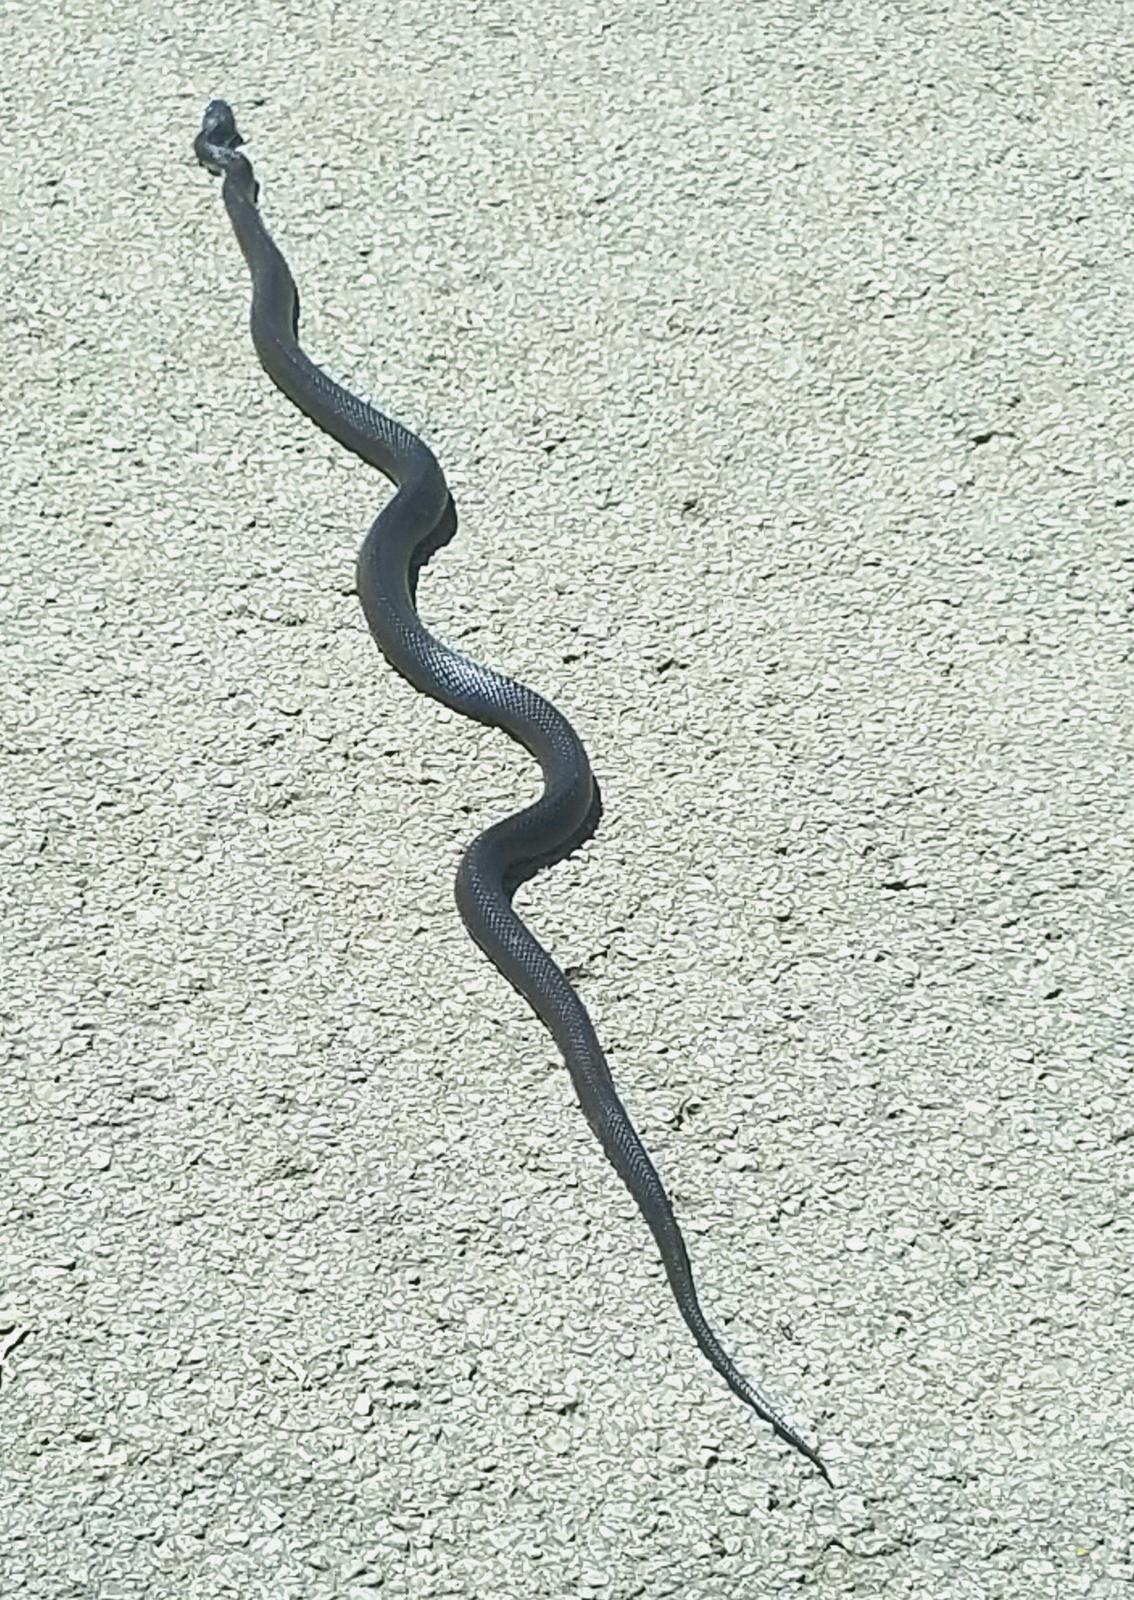 We never know what kind of critters we\'ll find under a house. This is a black snake. Actually, a black snake is a good thing to have around. They eat mice and other snakes. It was released unharmed!